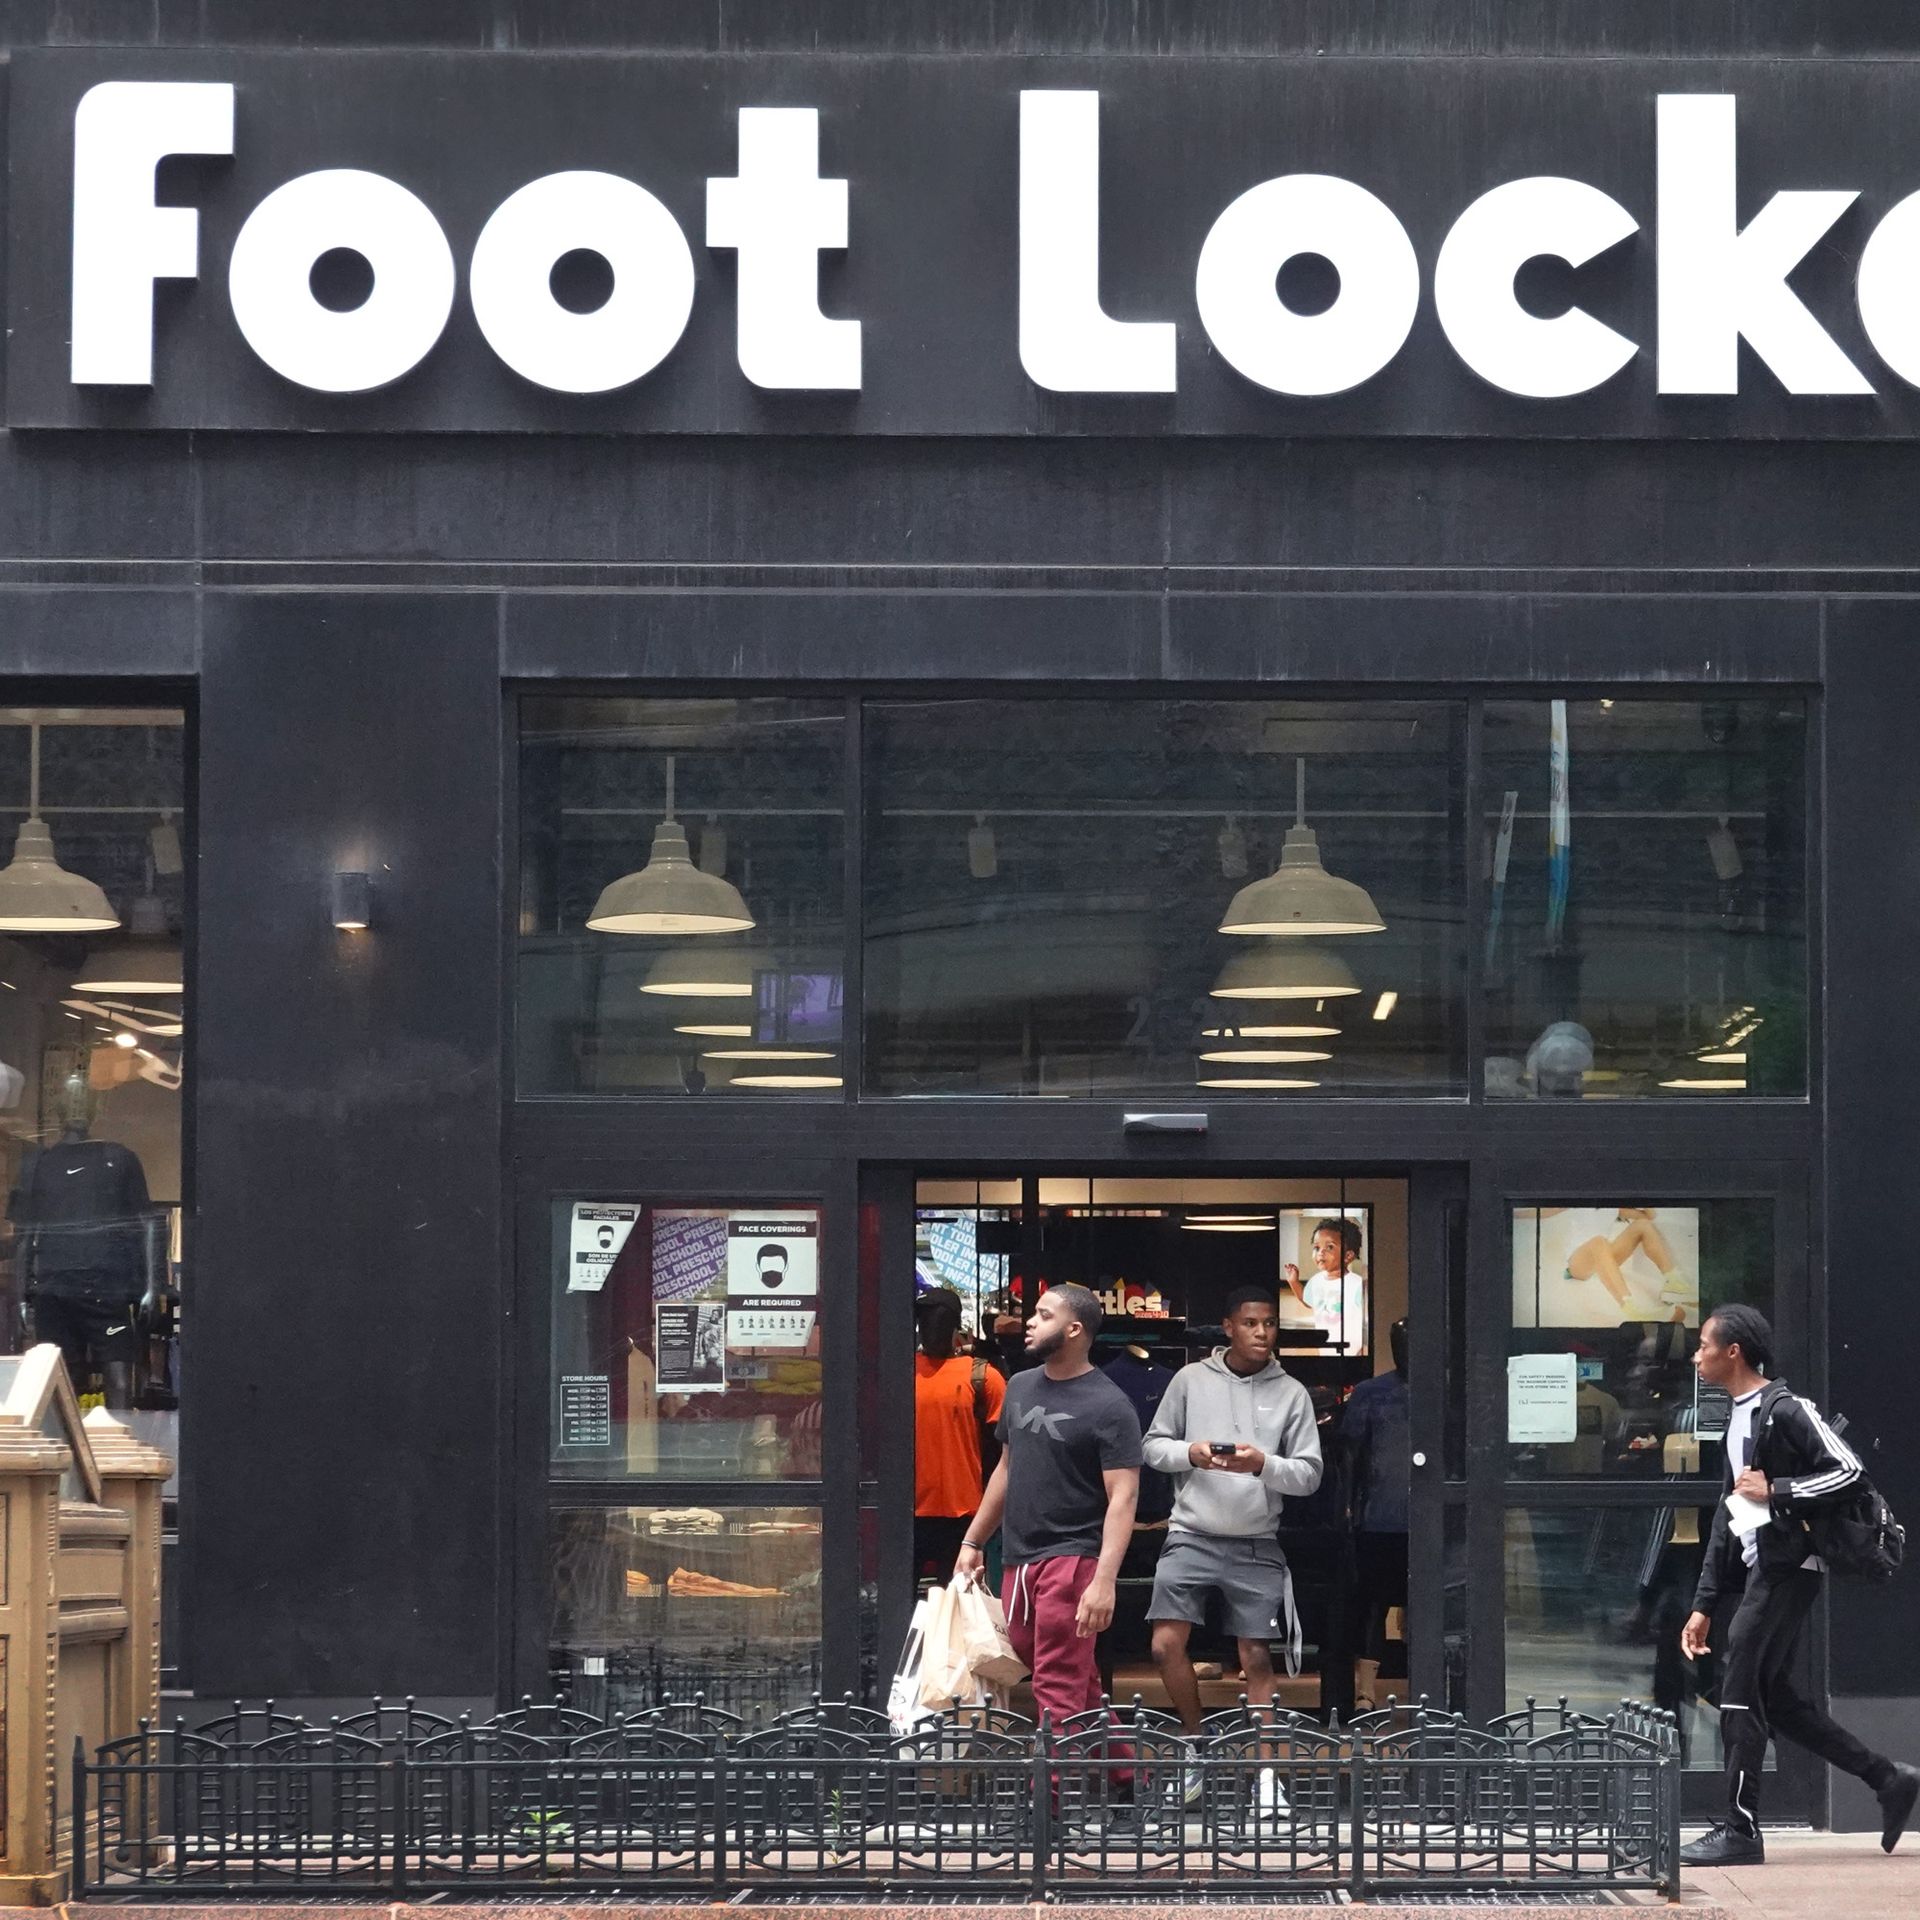 army foot locker products for sale